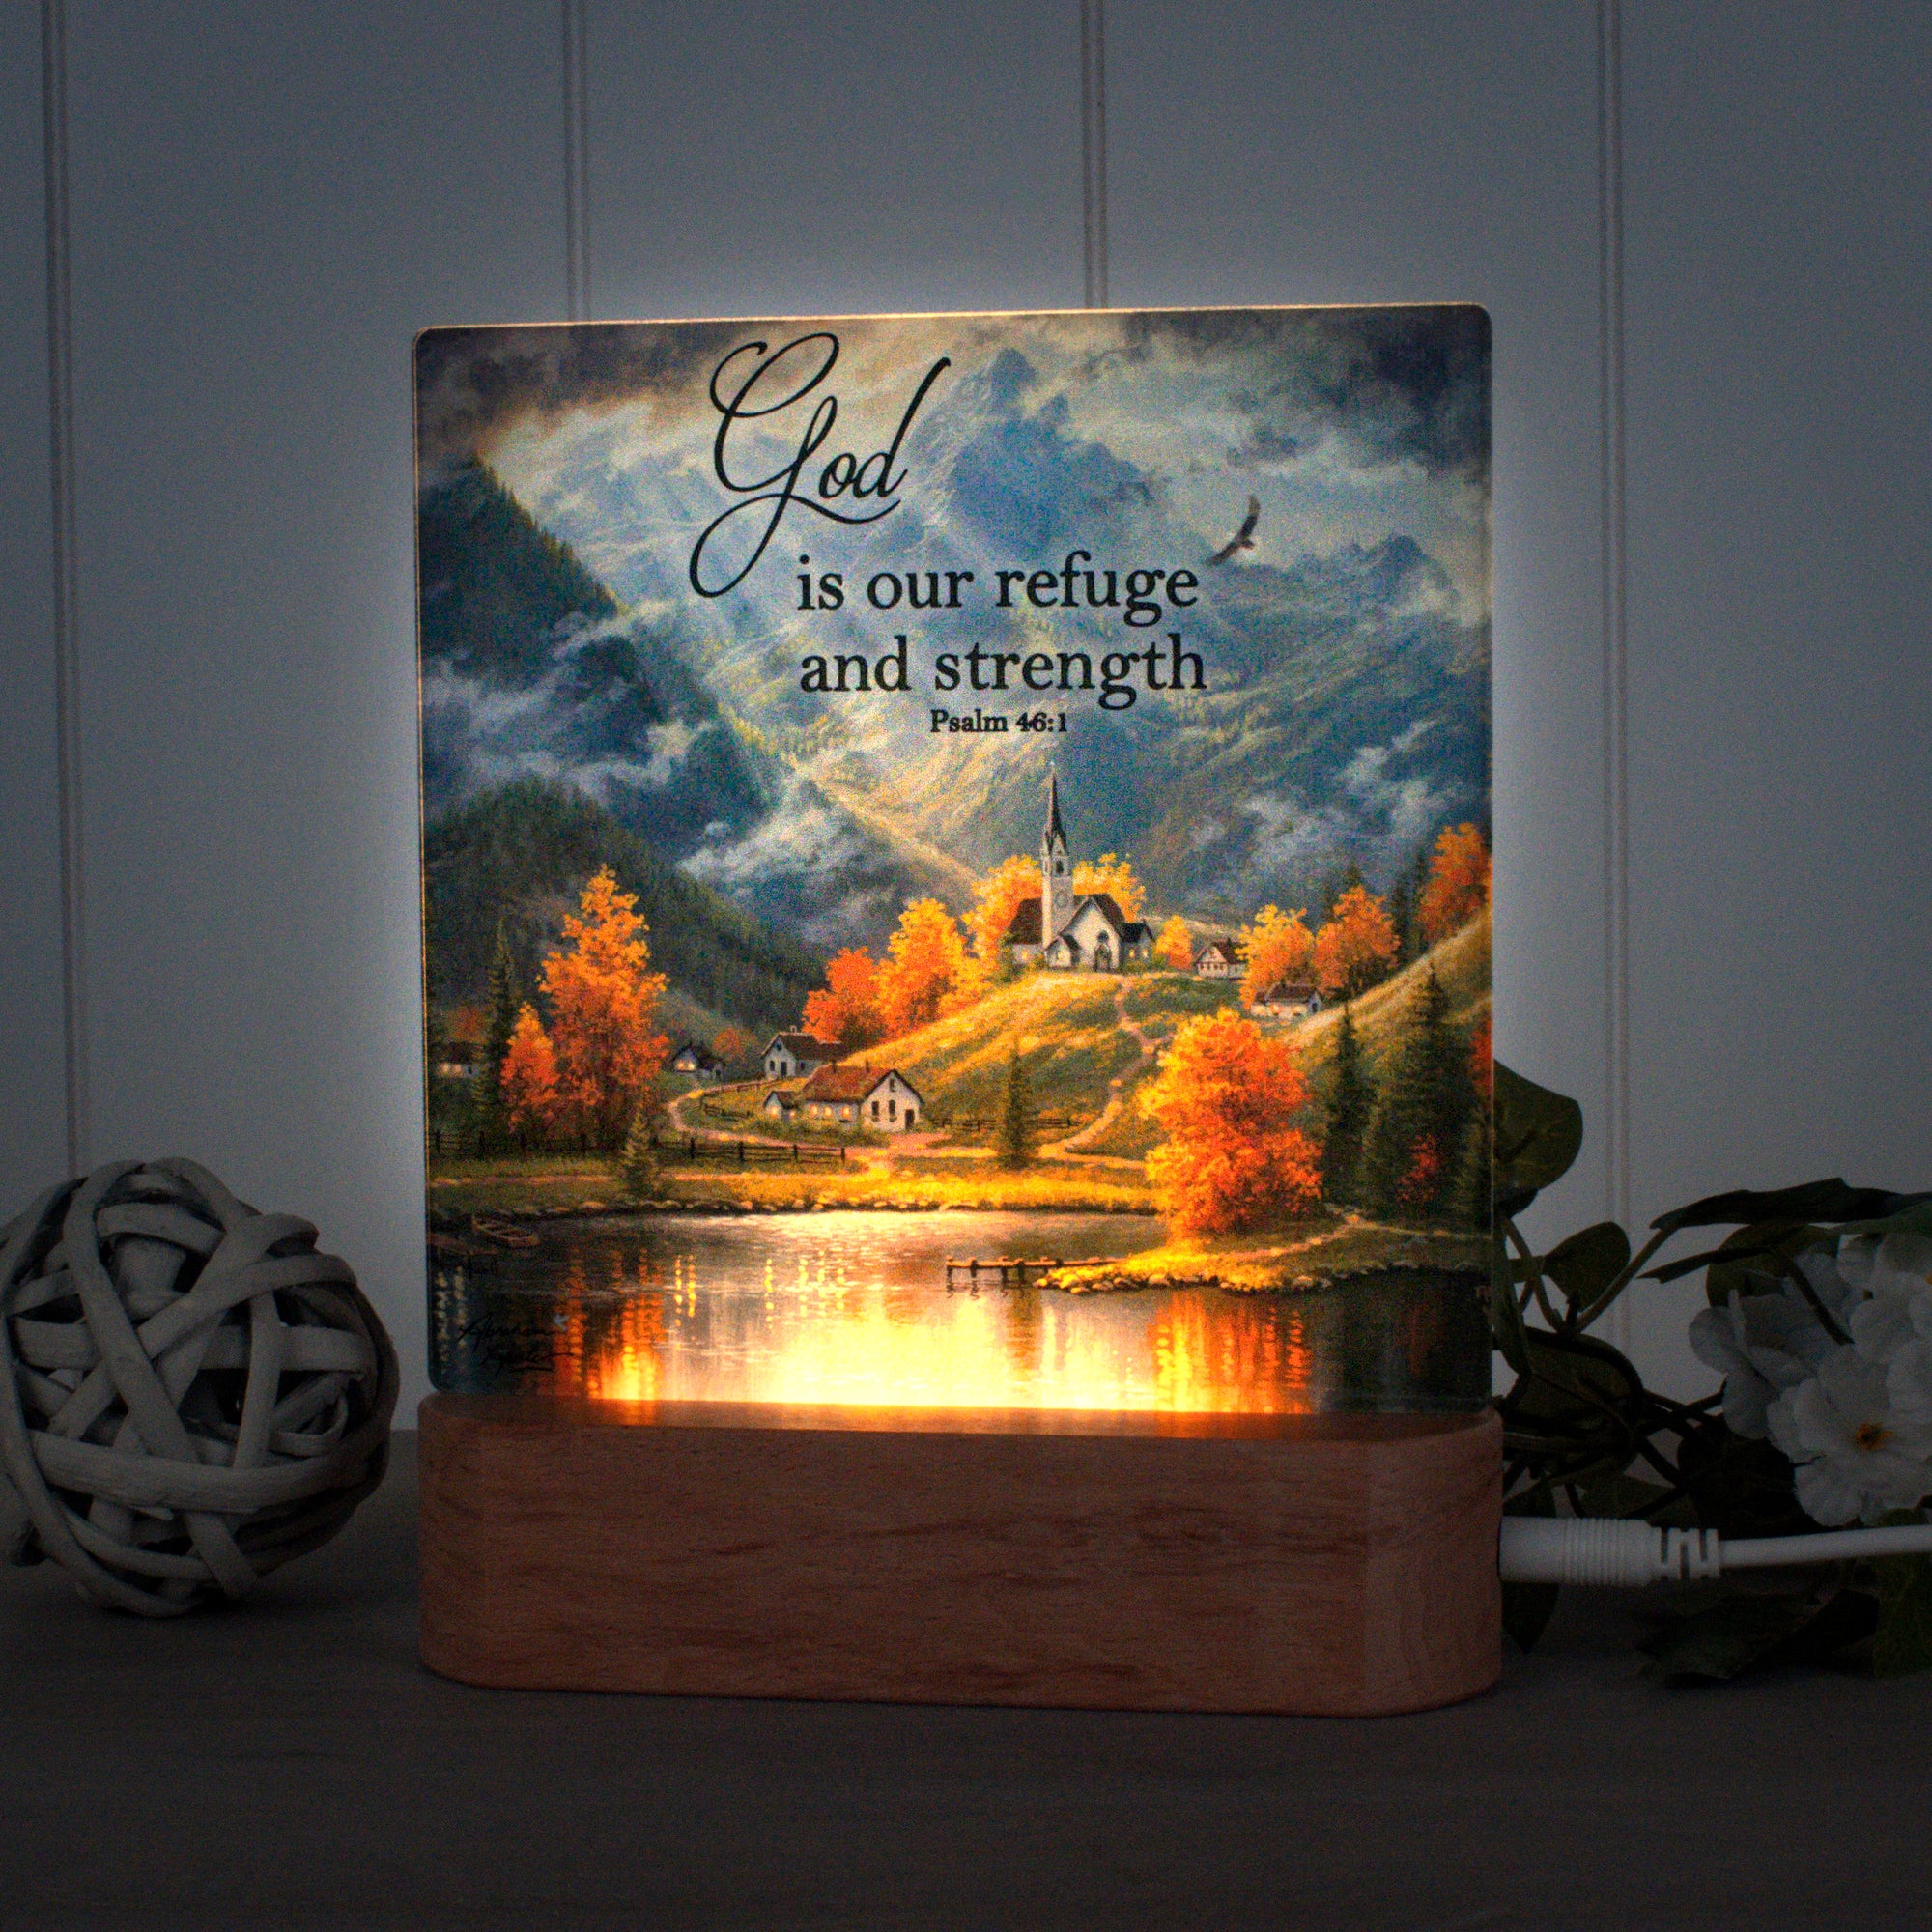 In Spirit in Truth with Scripture LED Nightlight